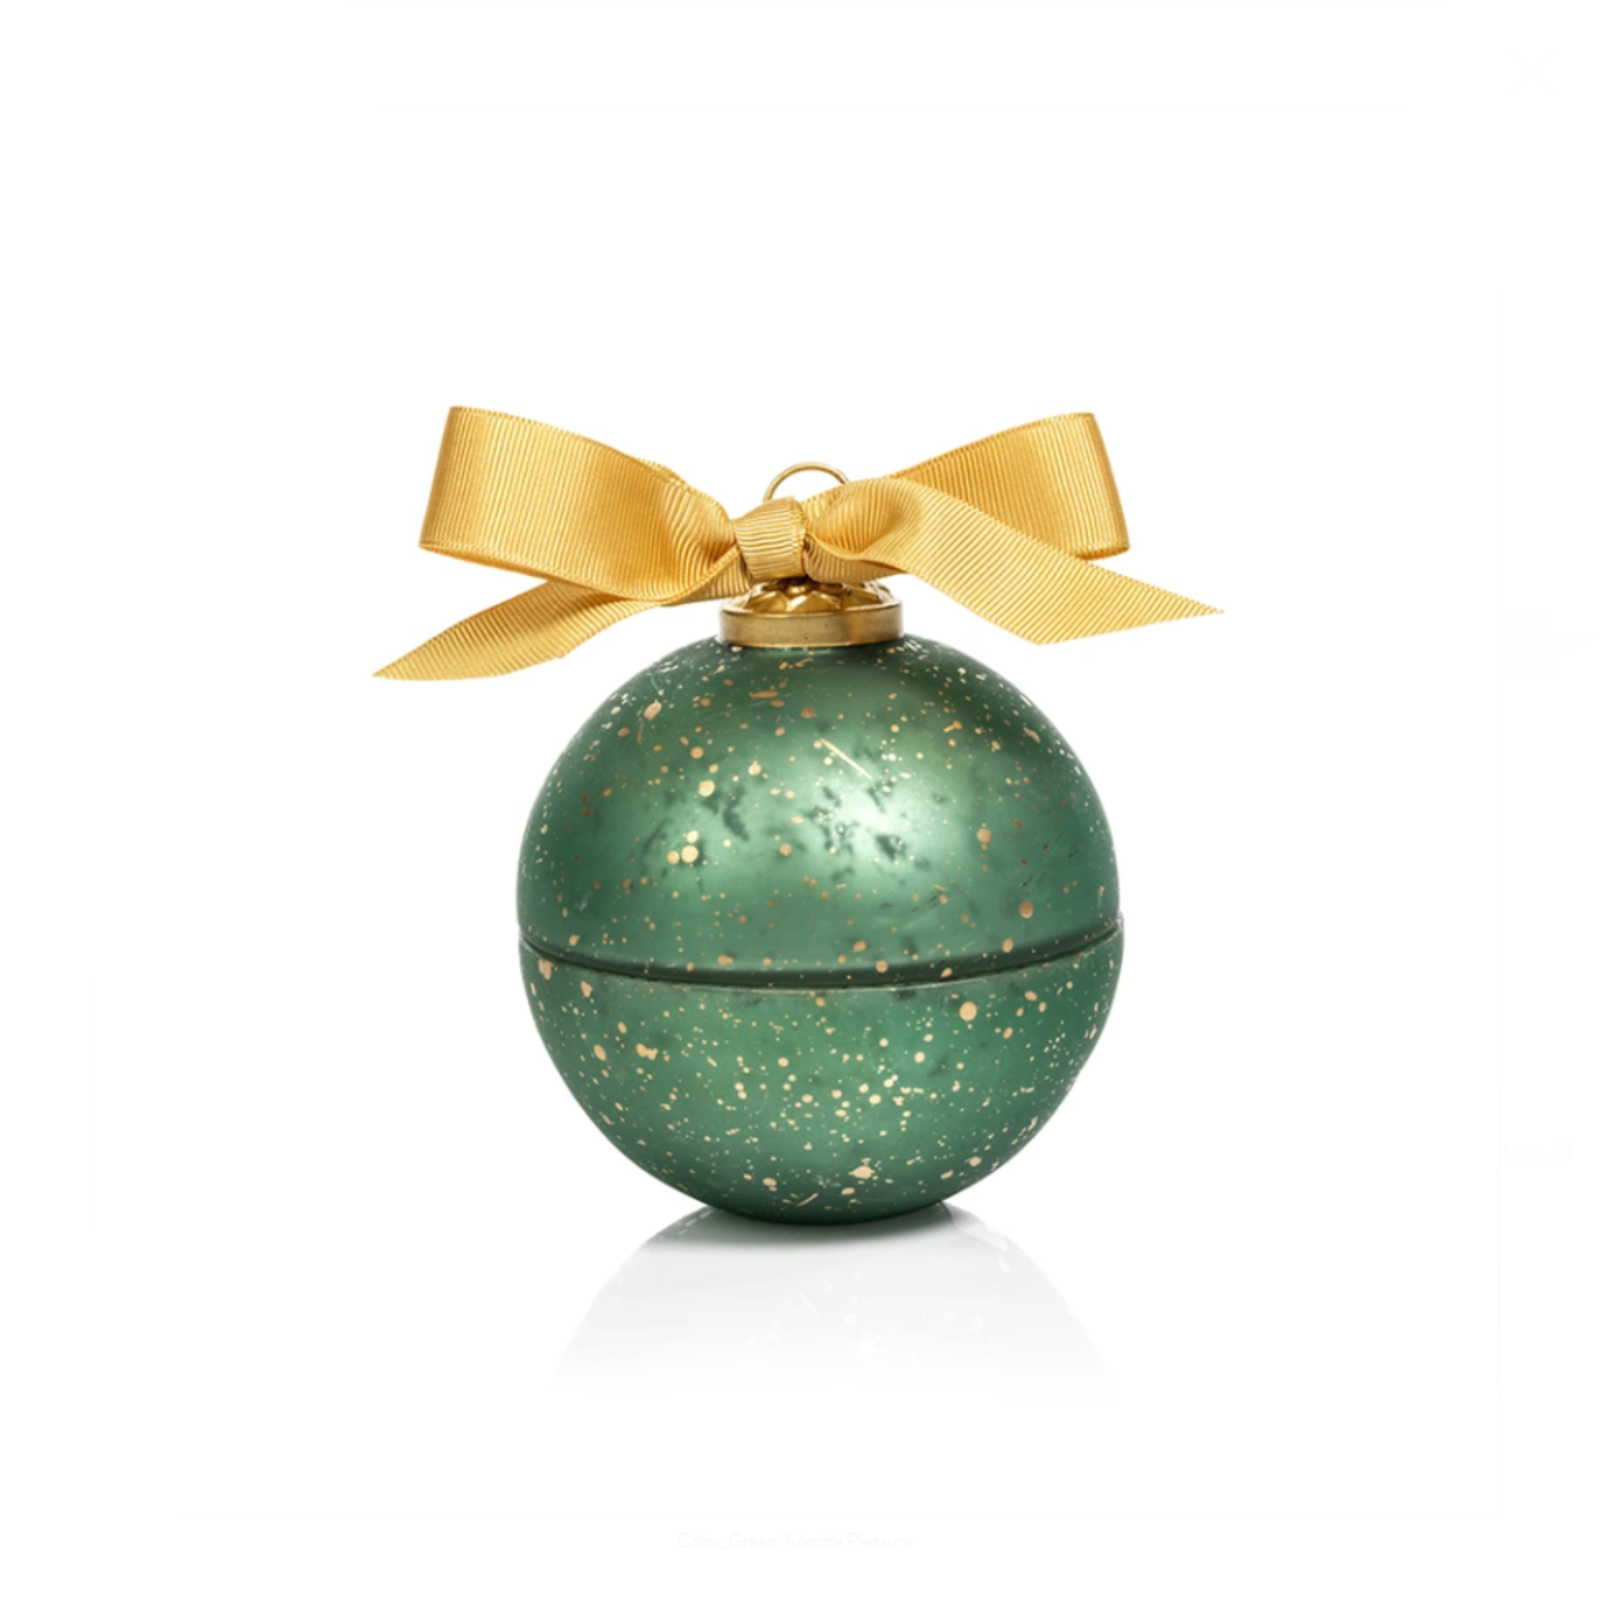 Zodax Scented Candle Ornament Green   IG-2603 loading=